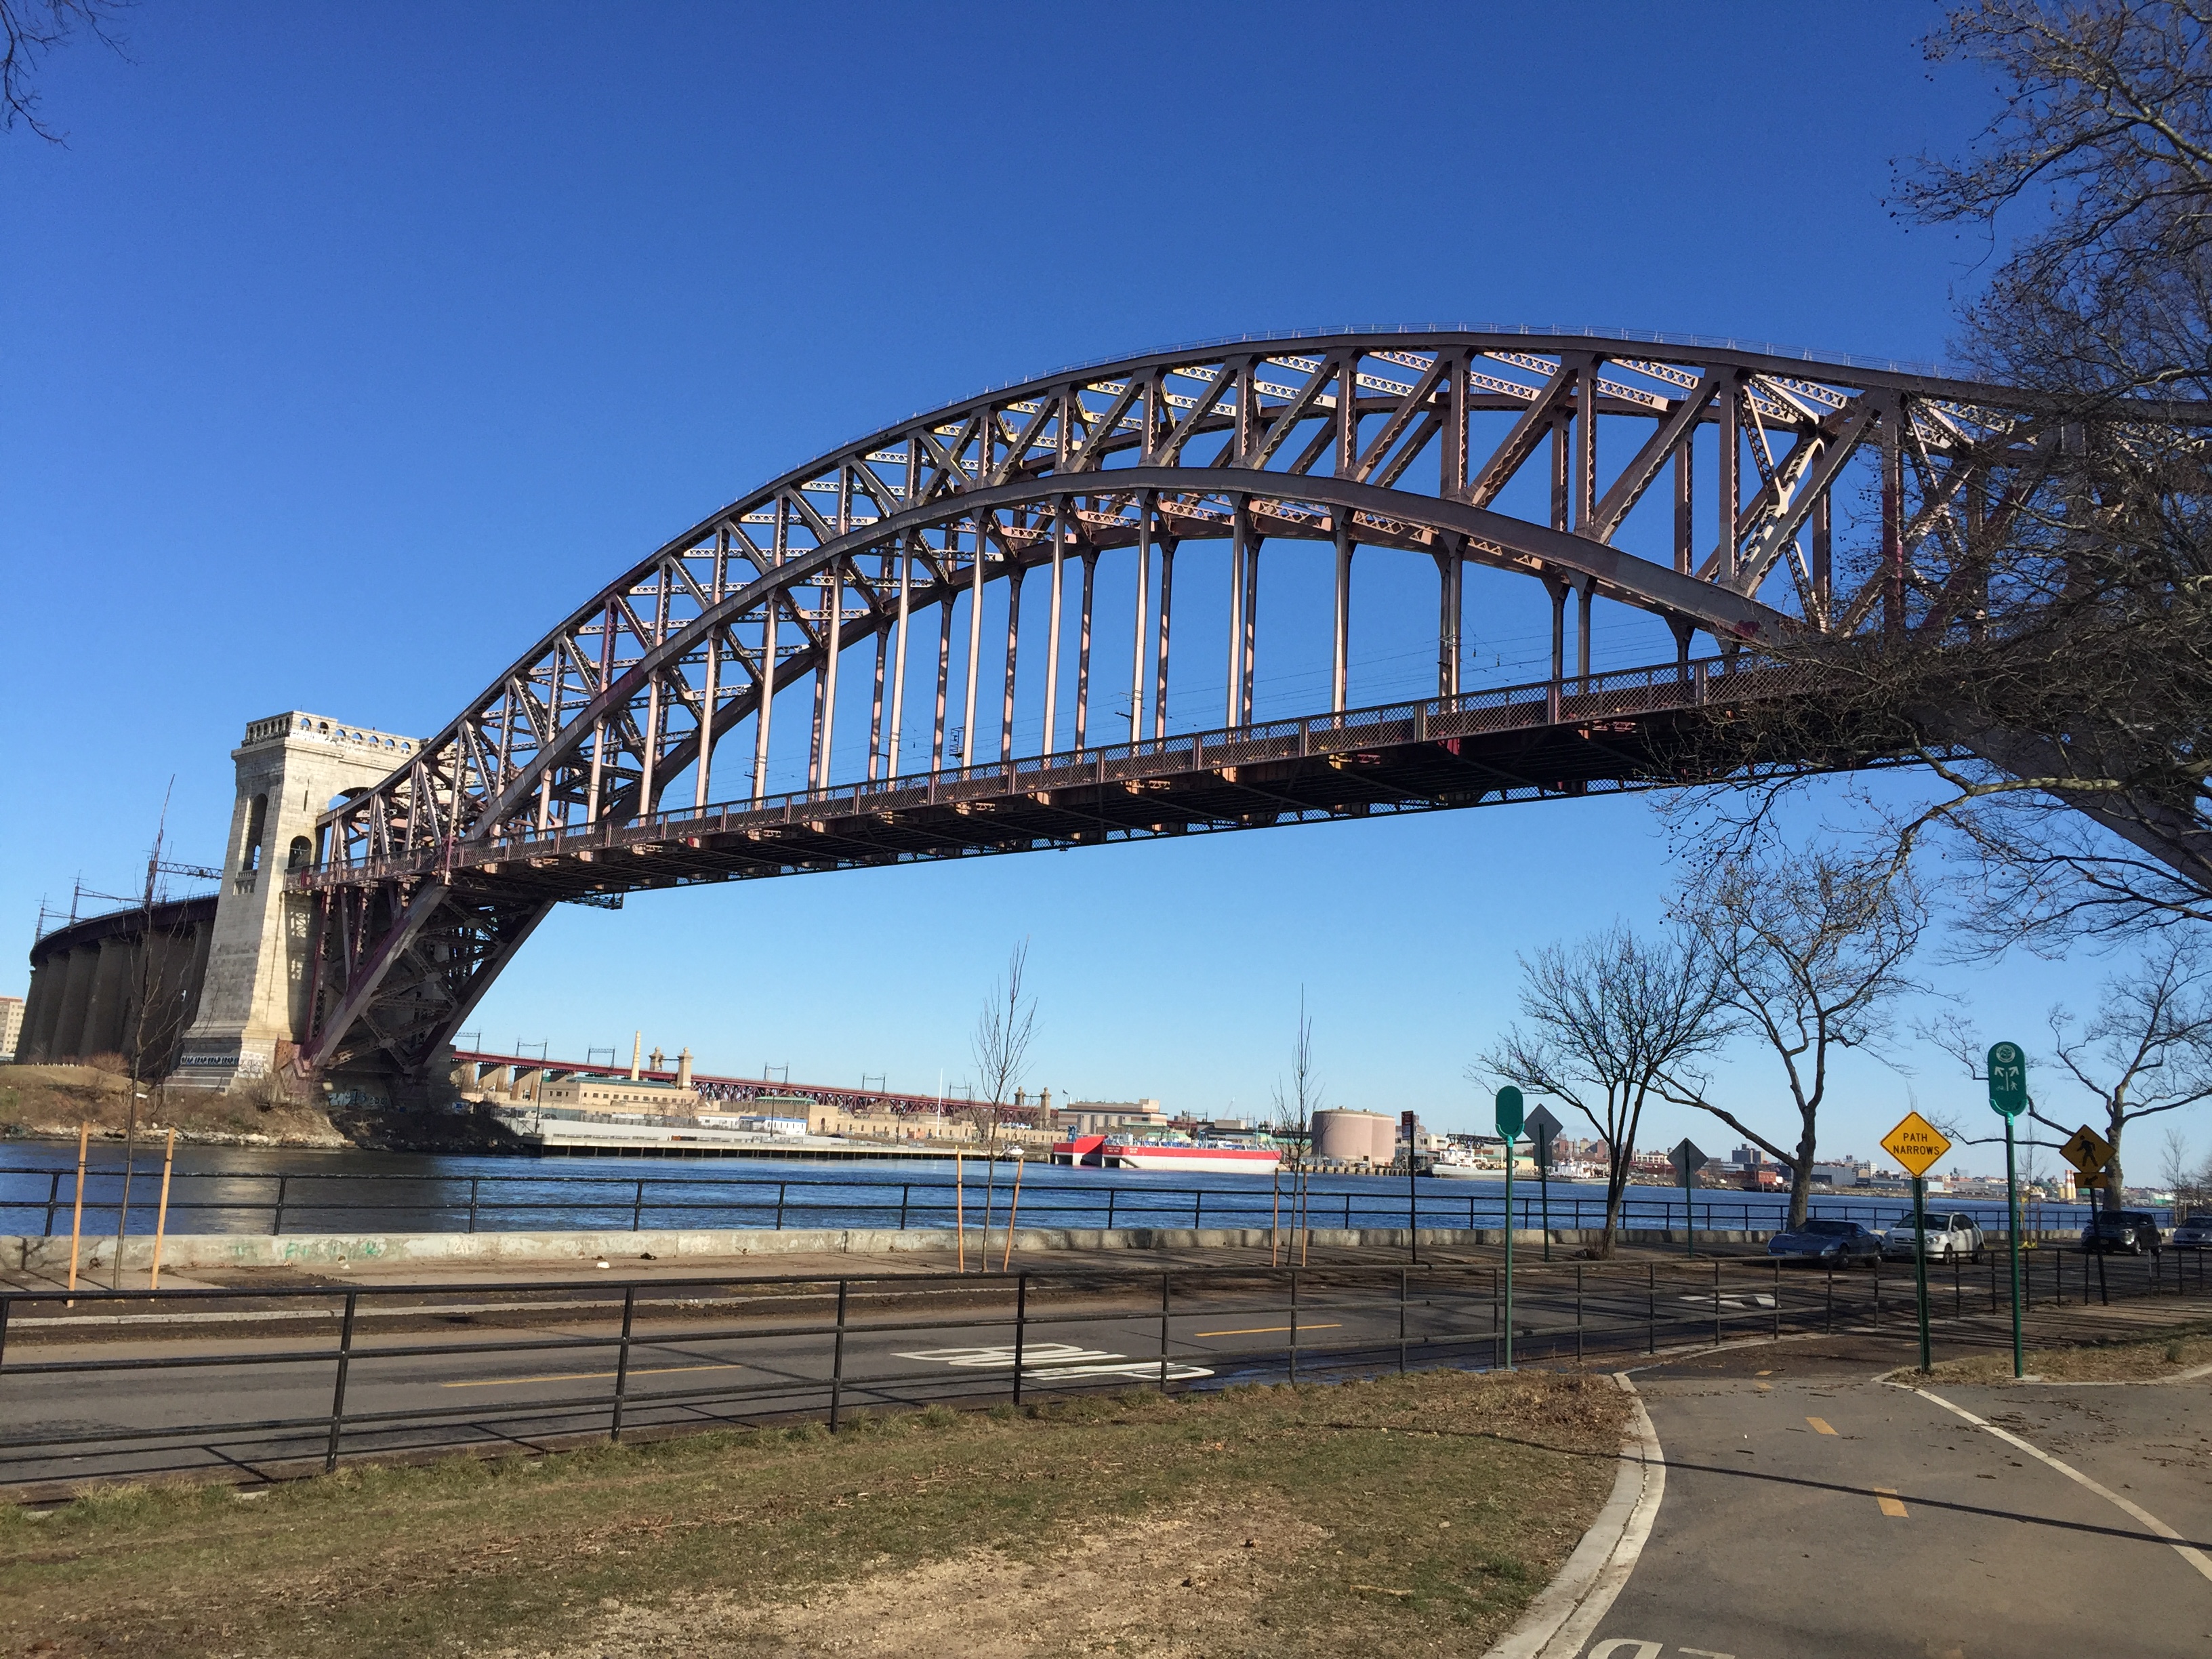 HELL GATE